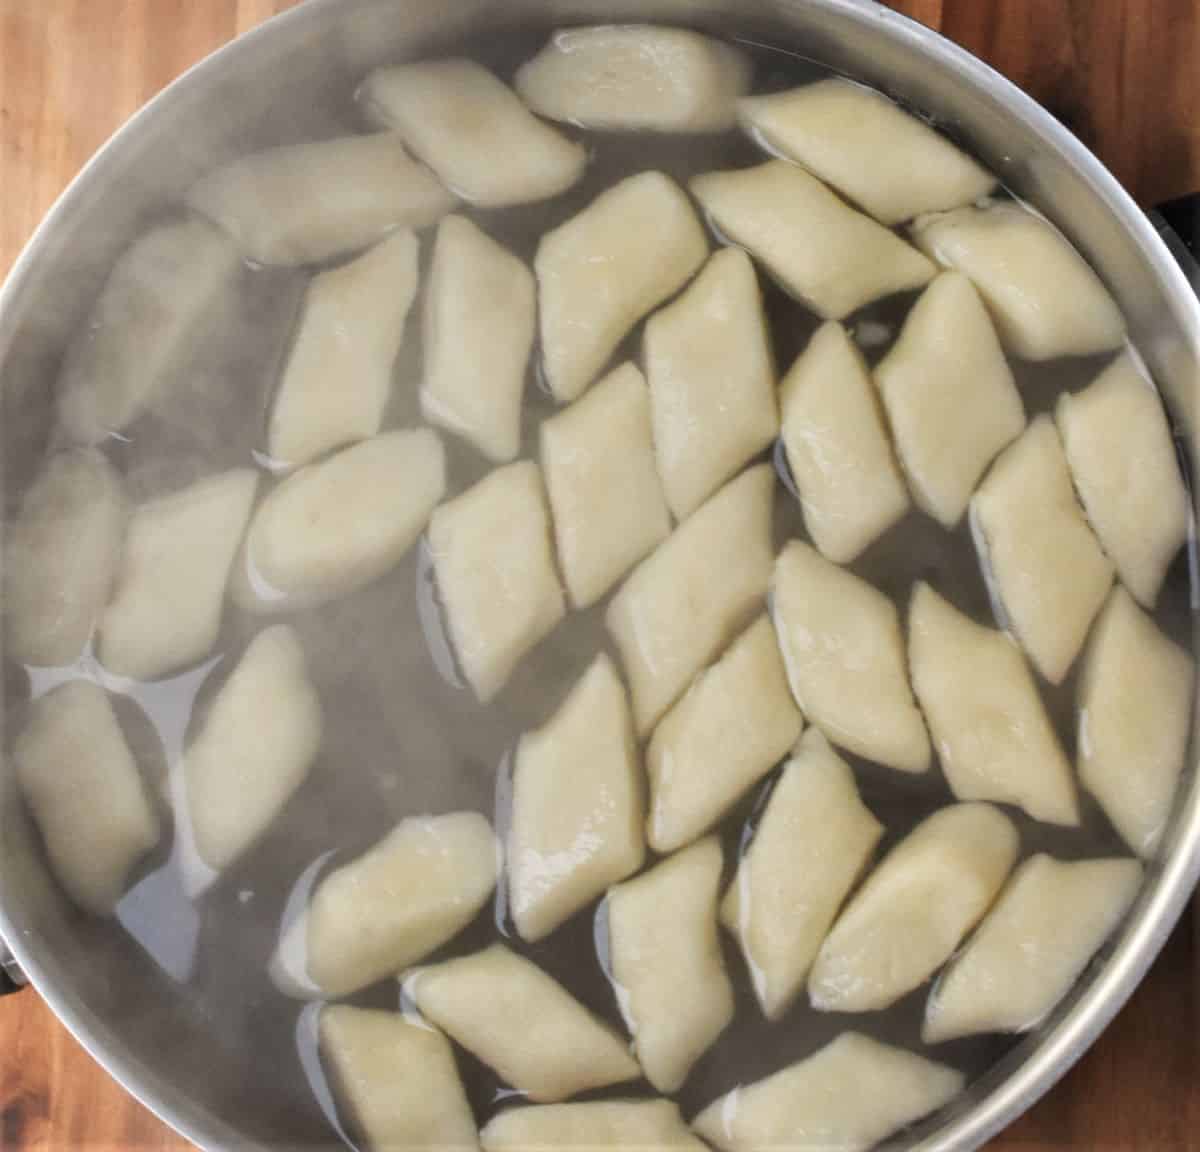 Boiling potato dumplings in large pot with steam visible.